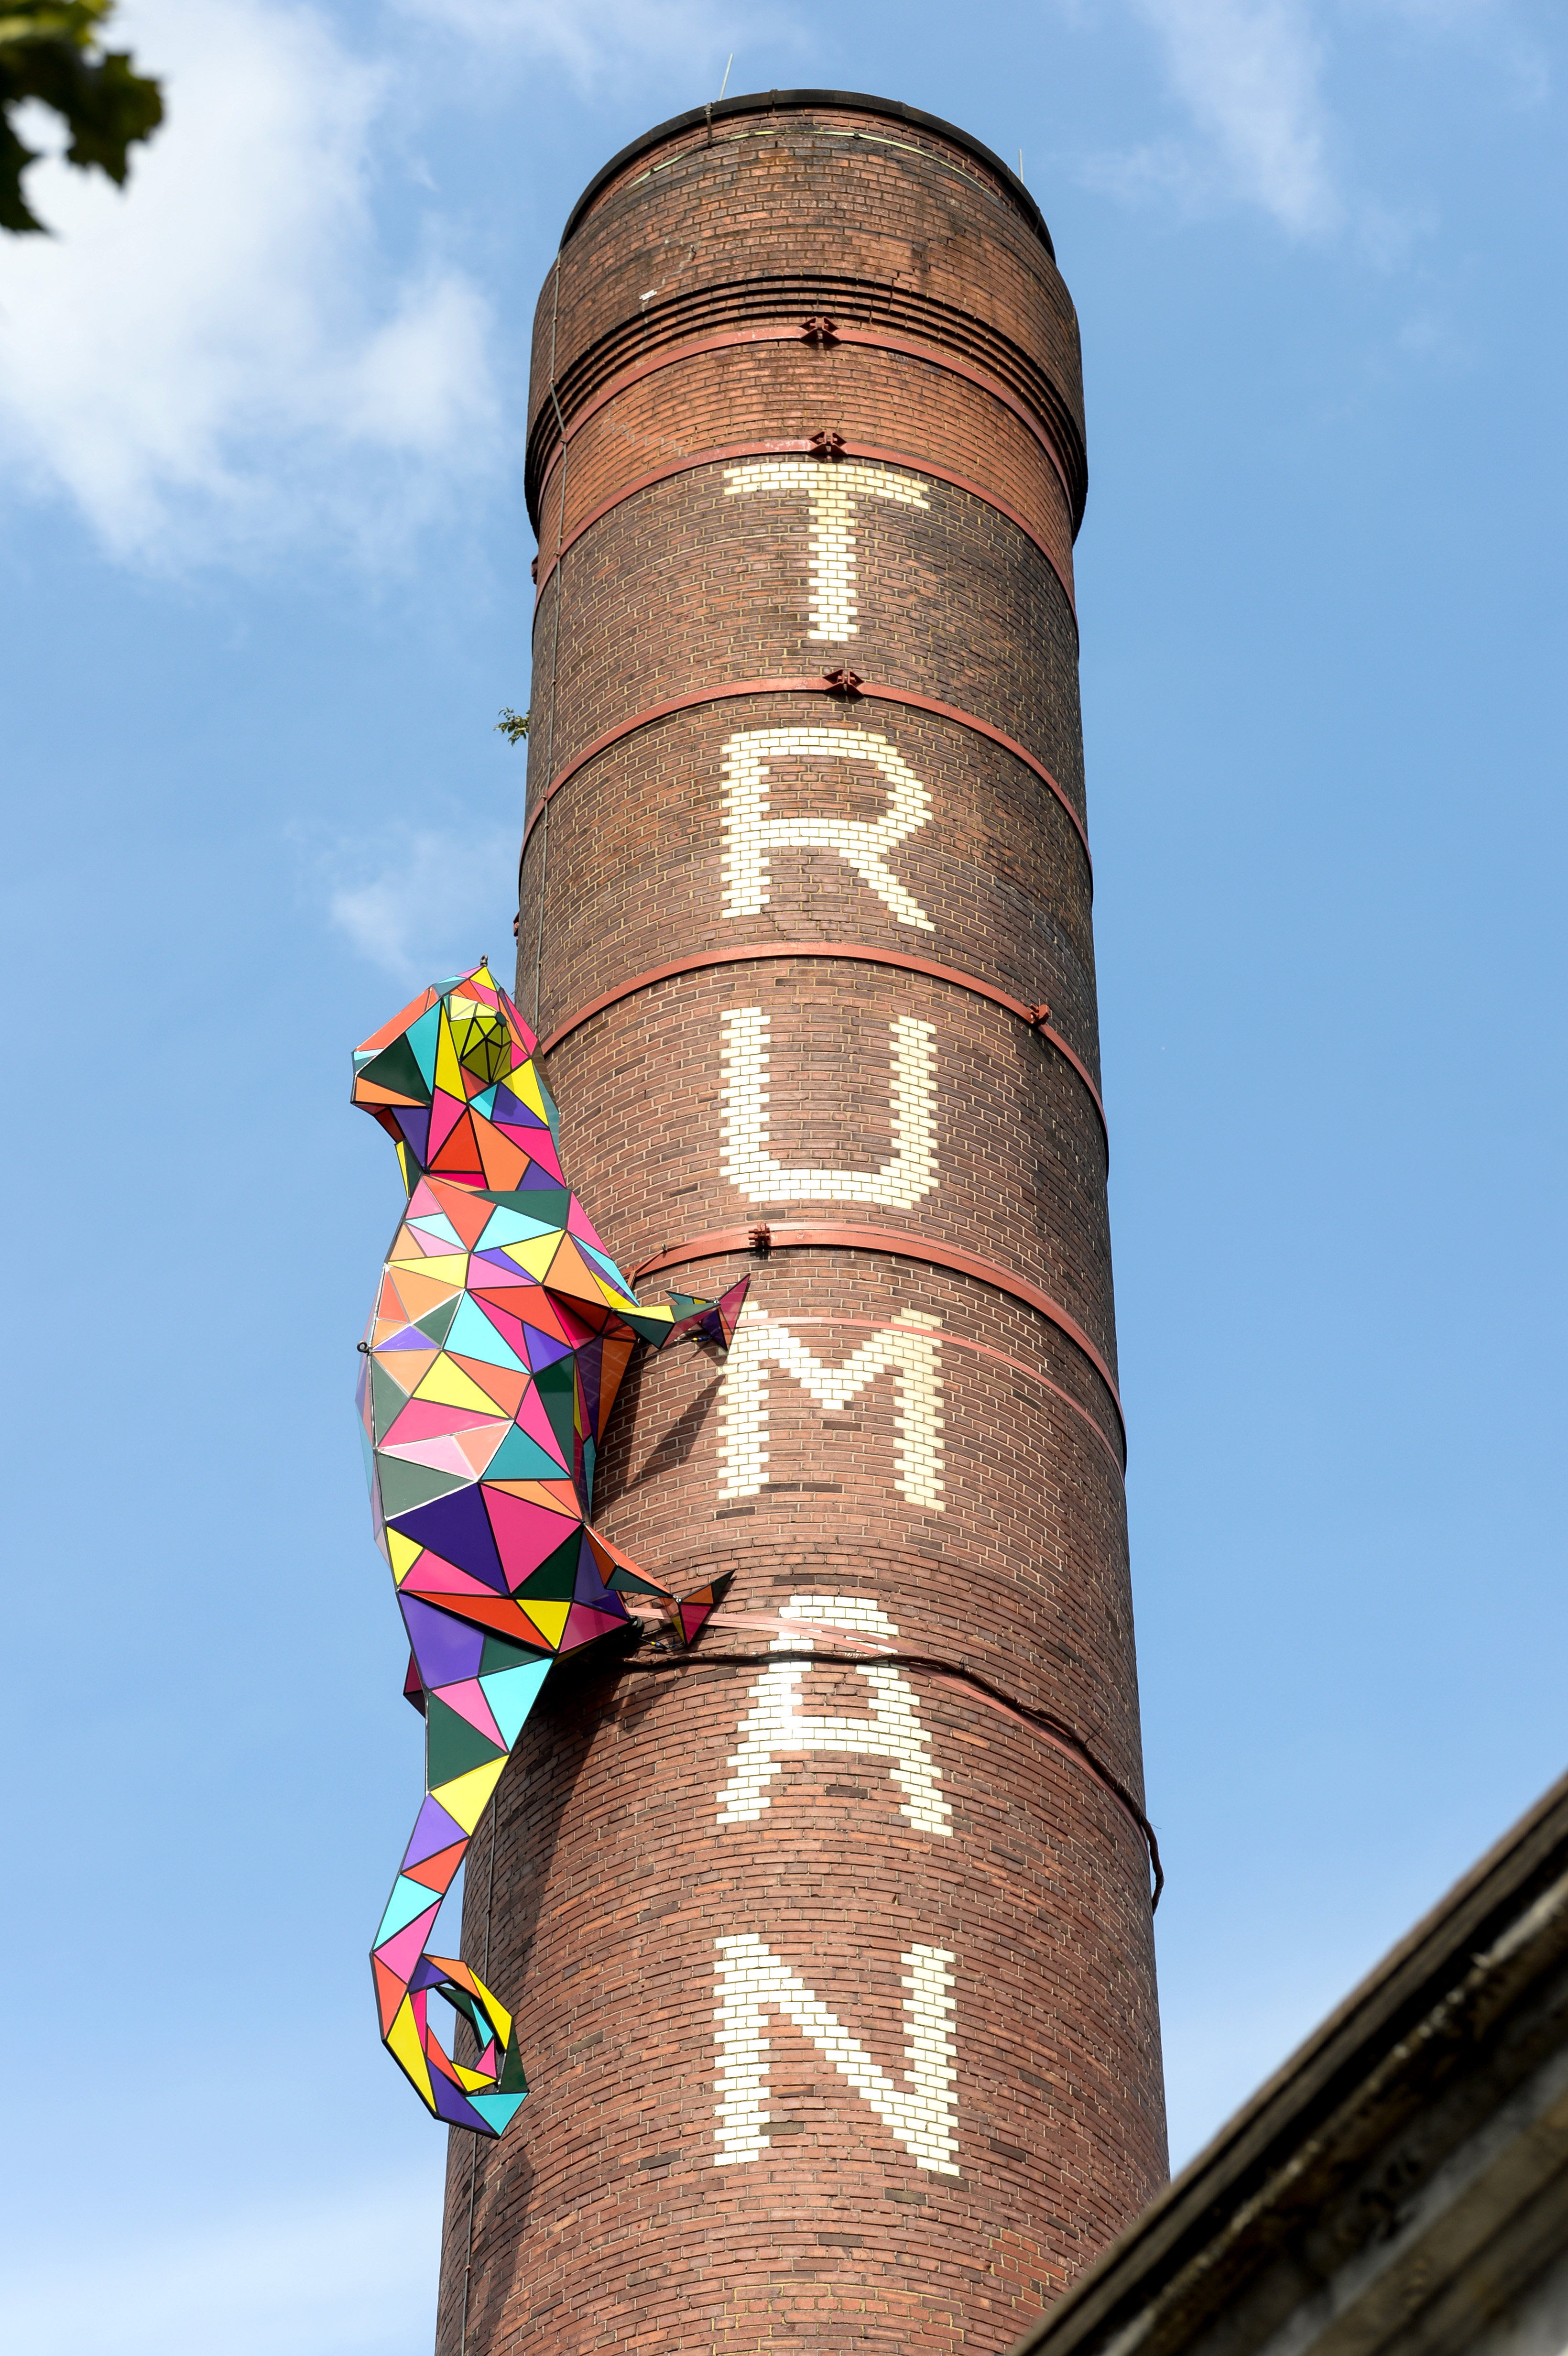 EDITORIAL USE ONLY An 8 metre sculpture of a Chameleon is installed on the chimney of the Old Truman Brewery in East London where it will be on display until September 1st to launch the new nhow Hotel in Shoreditch. PRESS ASSOCIATION Photo. Picture date: Thursday August 29, 2019. Photo credit should read: Doug Peters/PA Wire